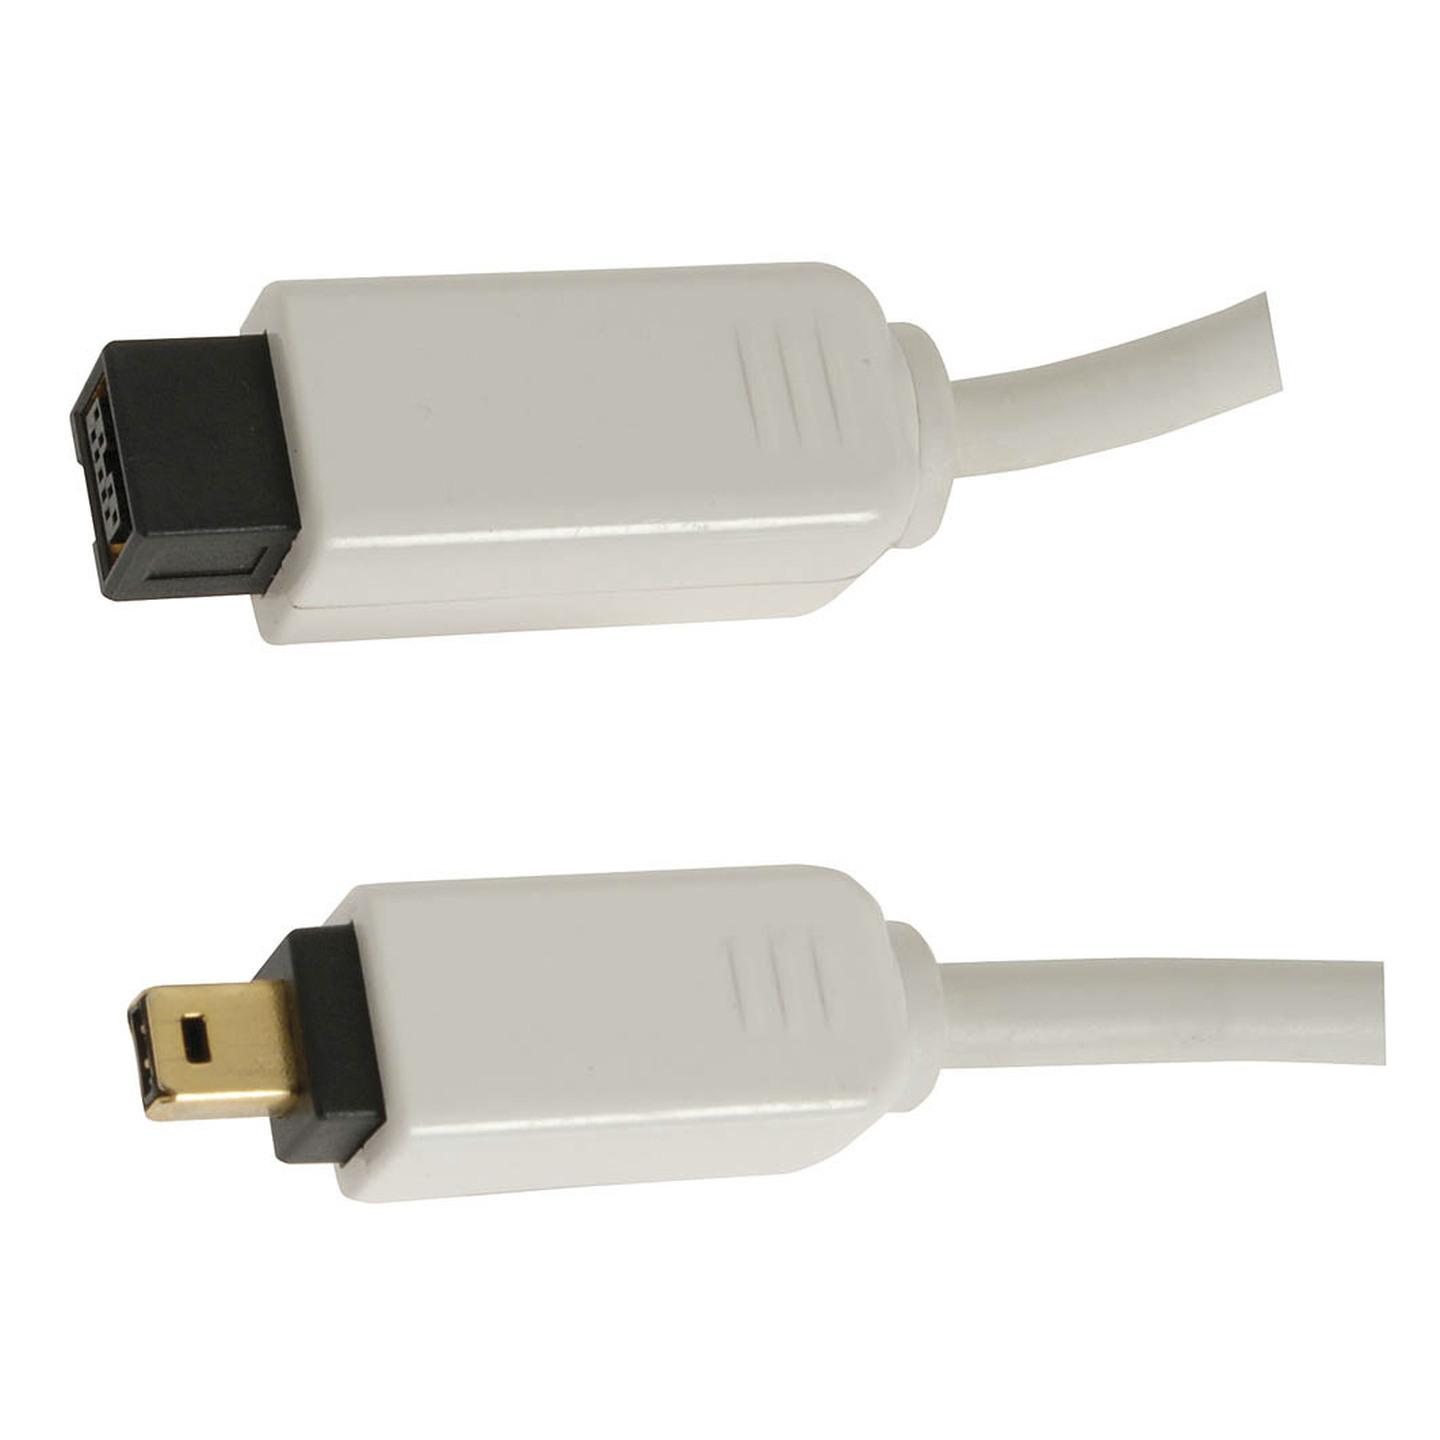 IEEE1394 B 9-pin to IEEE1394 A 4-pin Cable - 1.8m